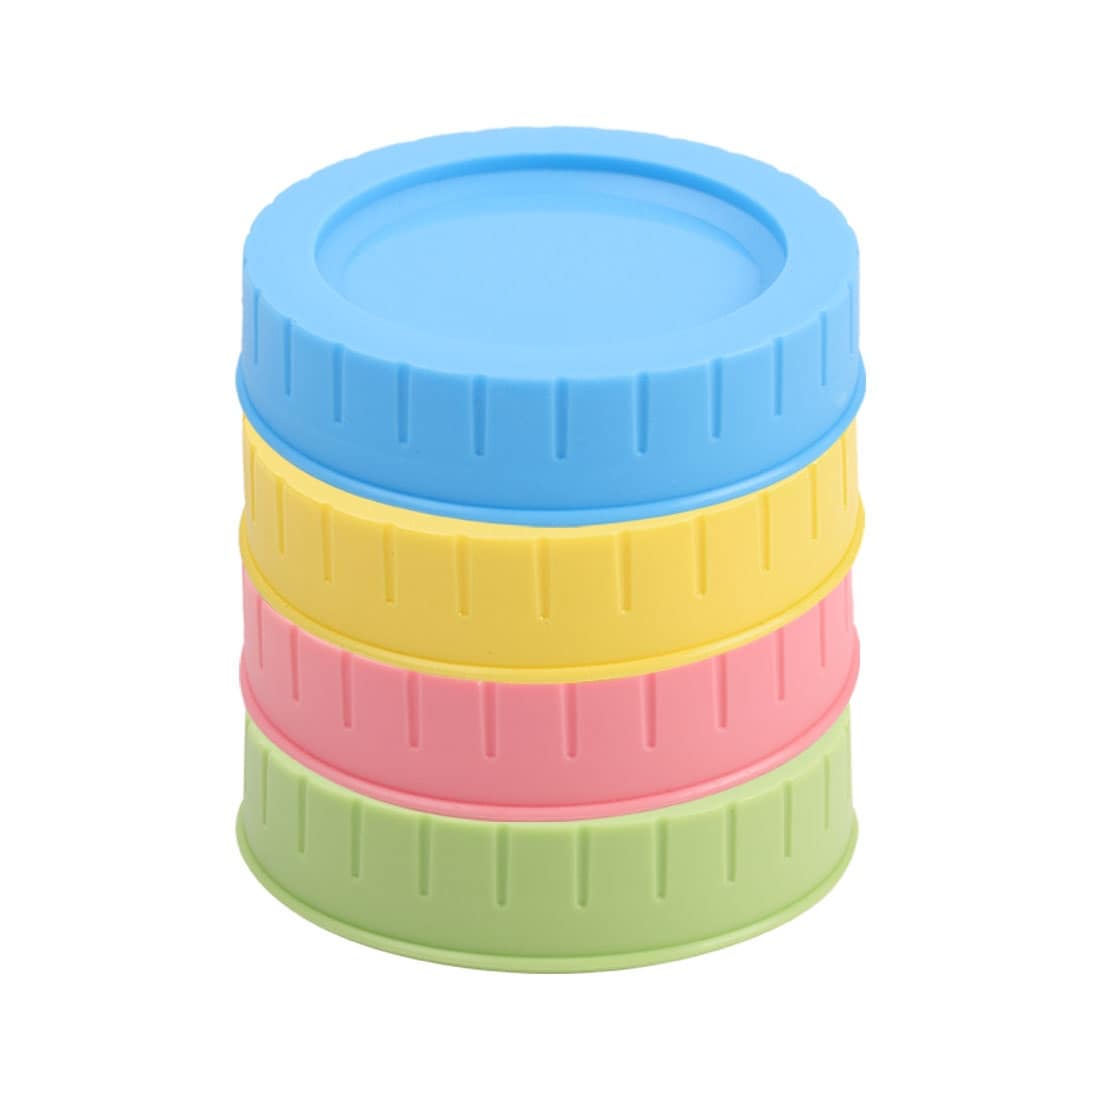 https://ak1.ostkcdn.com/images/products/is/images/direct/4a00d04ebef8b1f816e9c23749aa9f7d87540f67/4-Pack-Colored-Plastic-Regular-Mouth-Mason-Jar-Lids-with-Sealing-Rings-Food-Storage-Caps-for-Mason-Canning-Ball-Jars.jpg